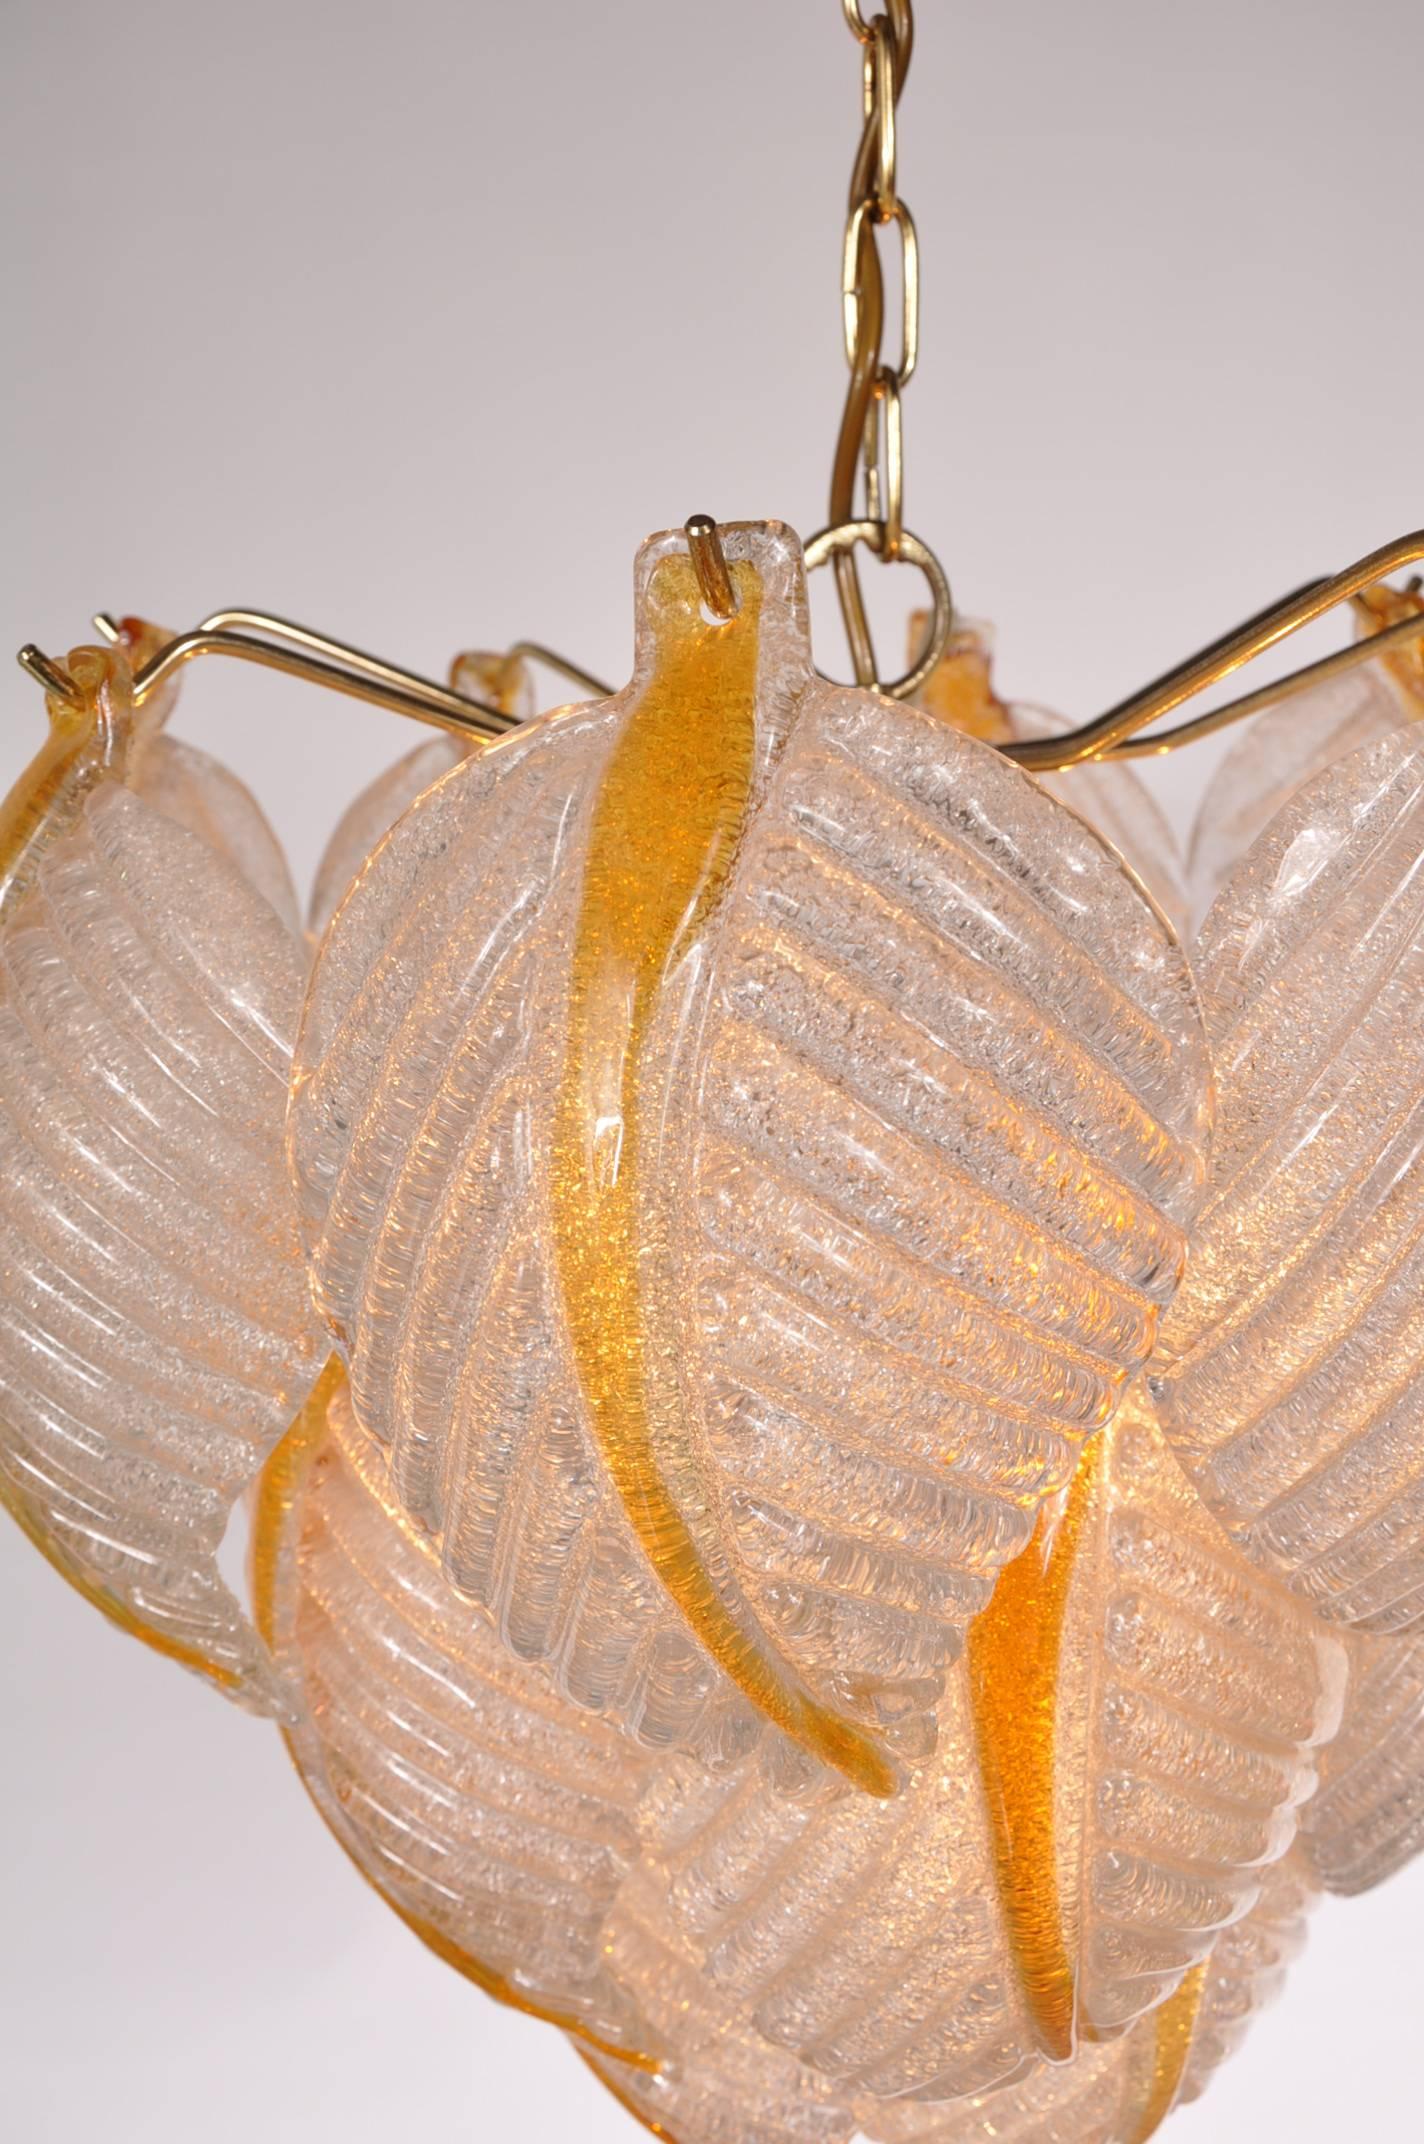 Eye-catching murano glass ceiling lamp by Mazzega, manufactured in Italy around 1960.

This stunning piece consists of several high quality murano glass leaves, held together with brass arms. This unique structure gives it a beautifull appearance